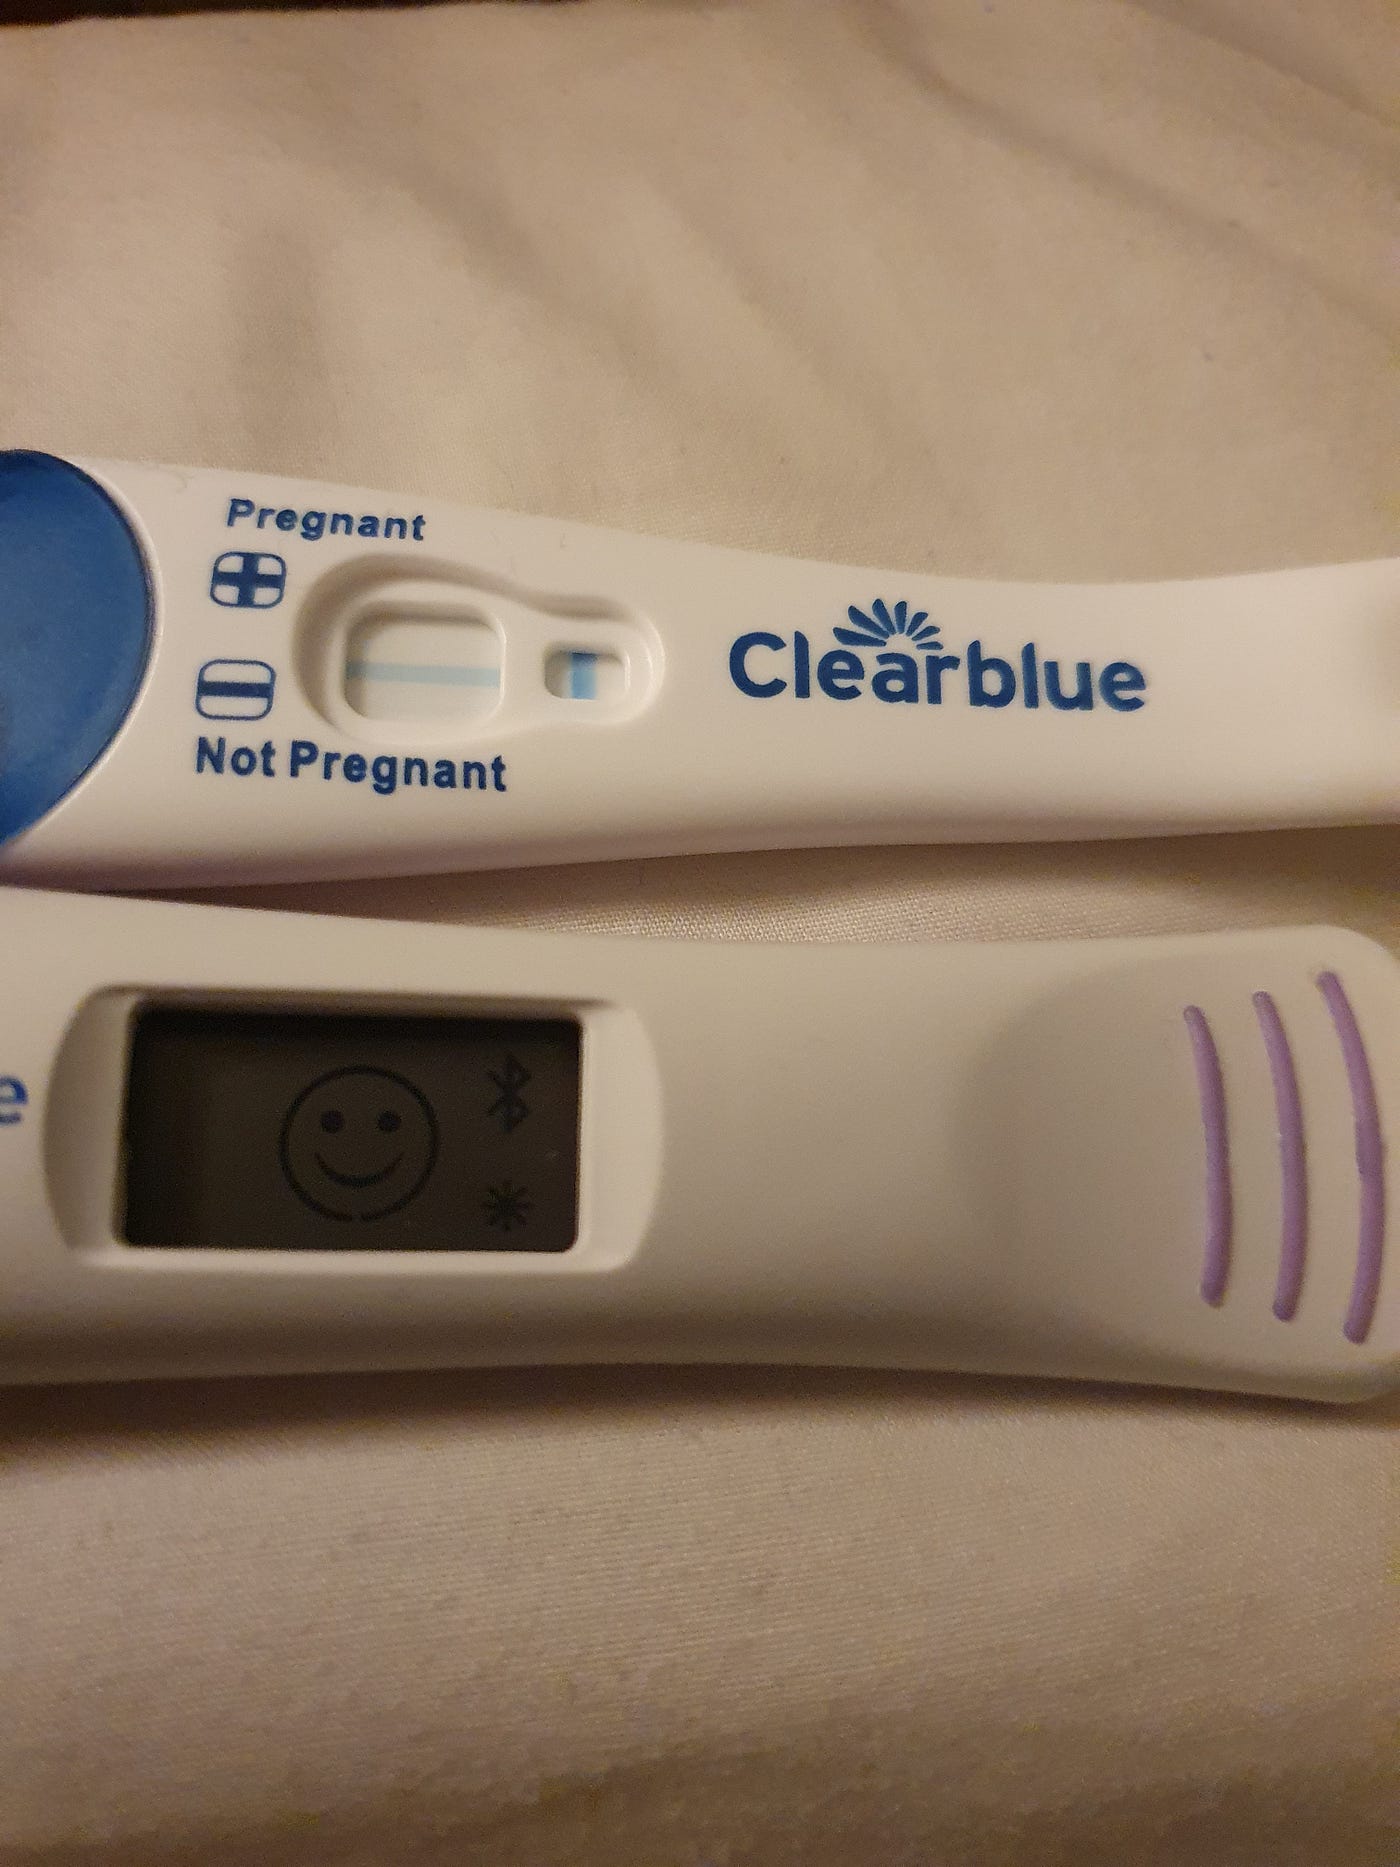 How I found out that ovulation tests can tell you are pregnant | by The  writing bug 🐛 | Medium